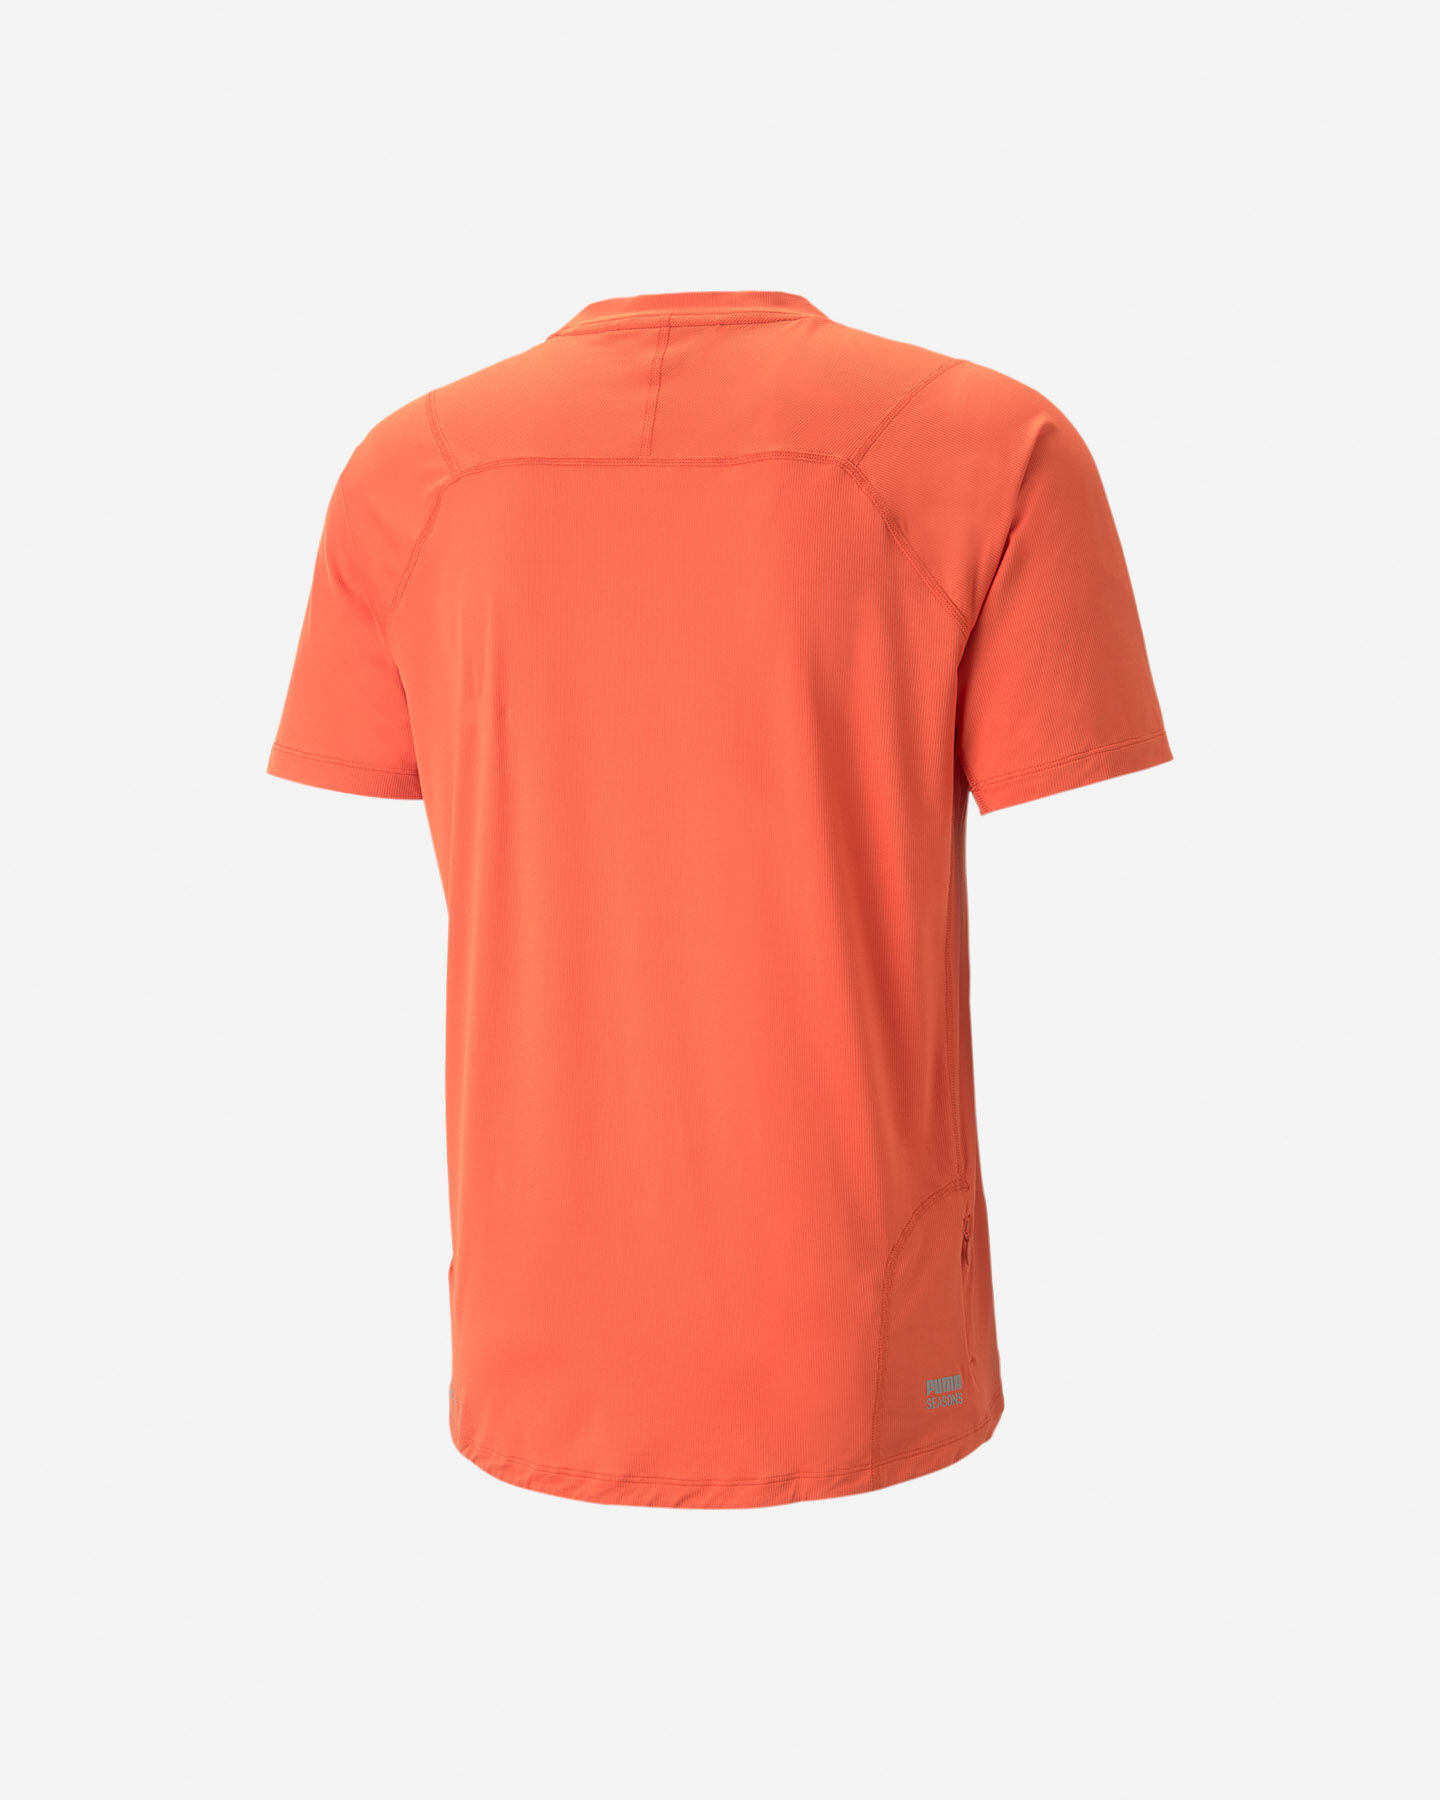  T-Shirt running PUMA SEASONS COOLCELL M S5540630 scatto 1